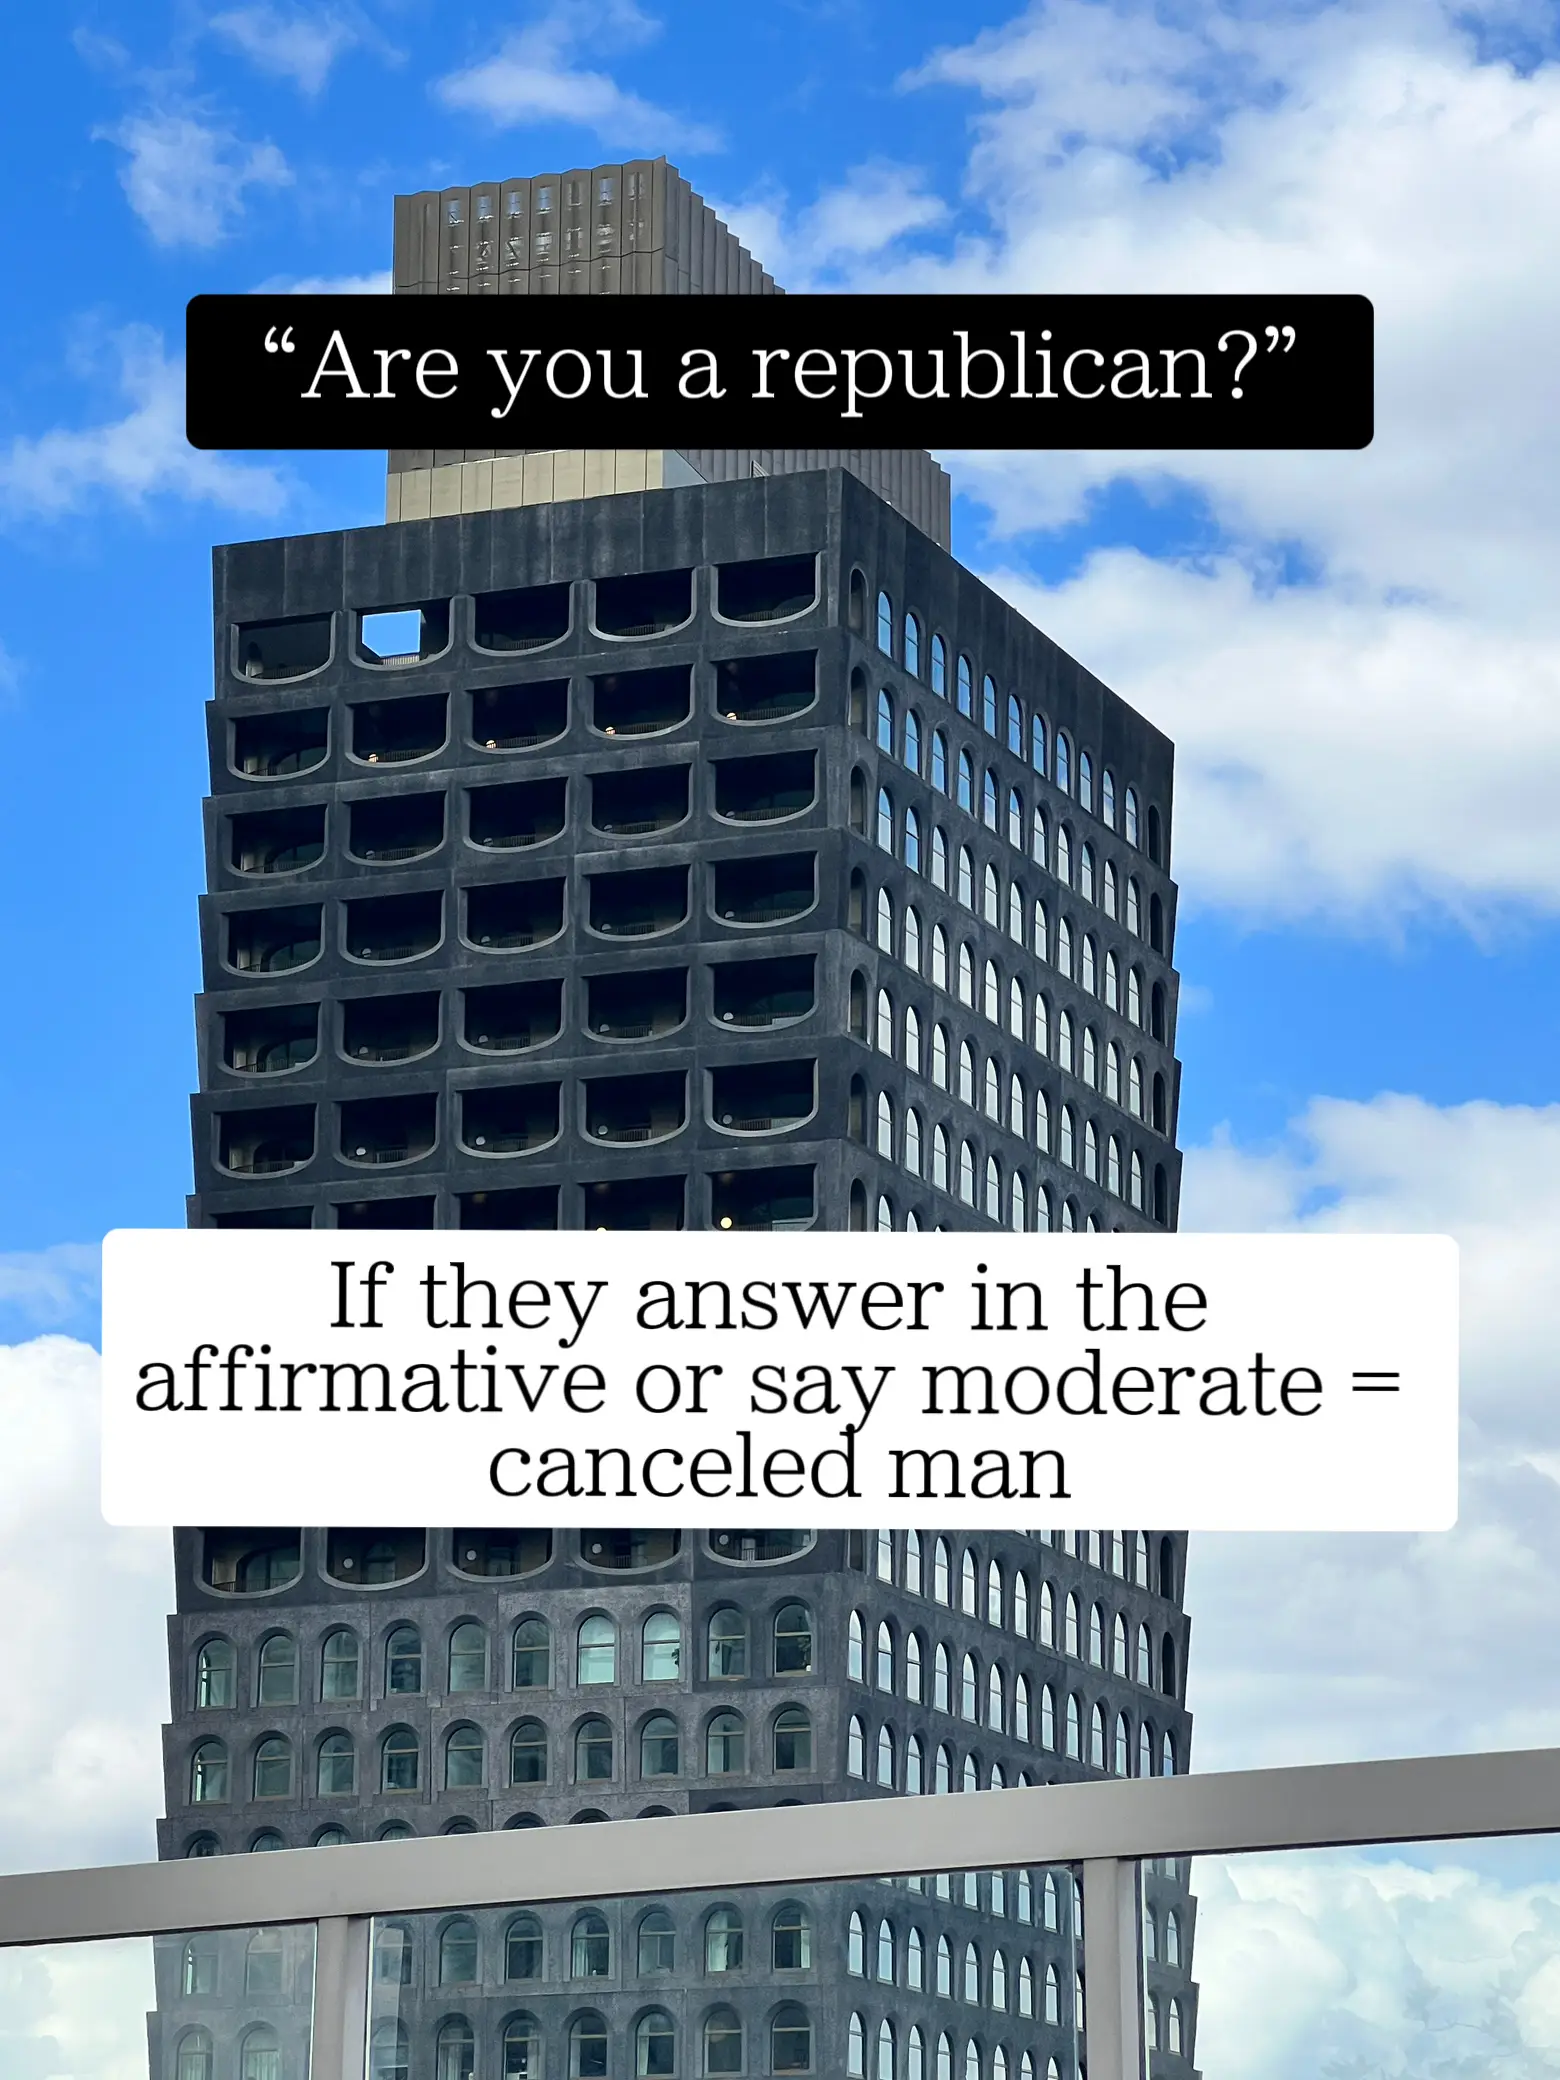  A building with a sign that says "Are you a republican?".